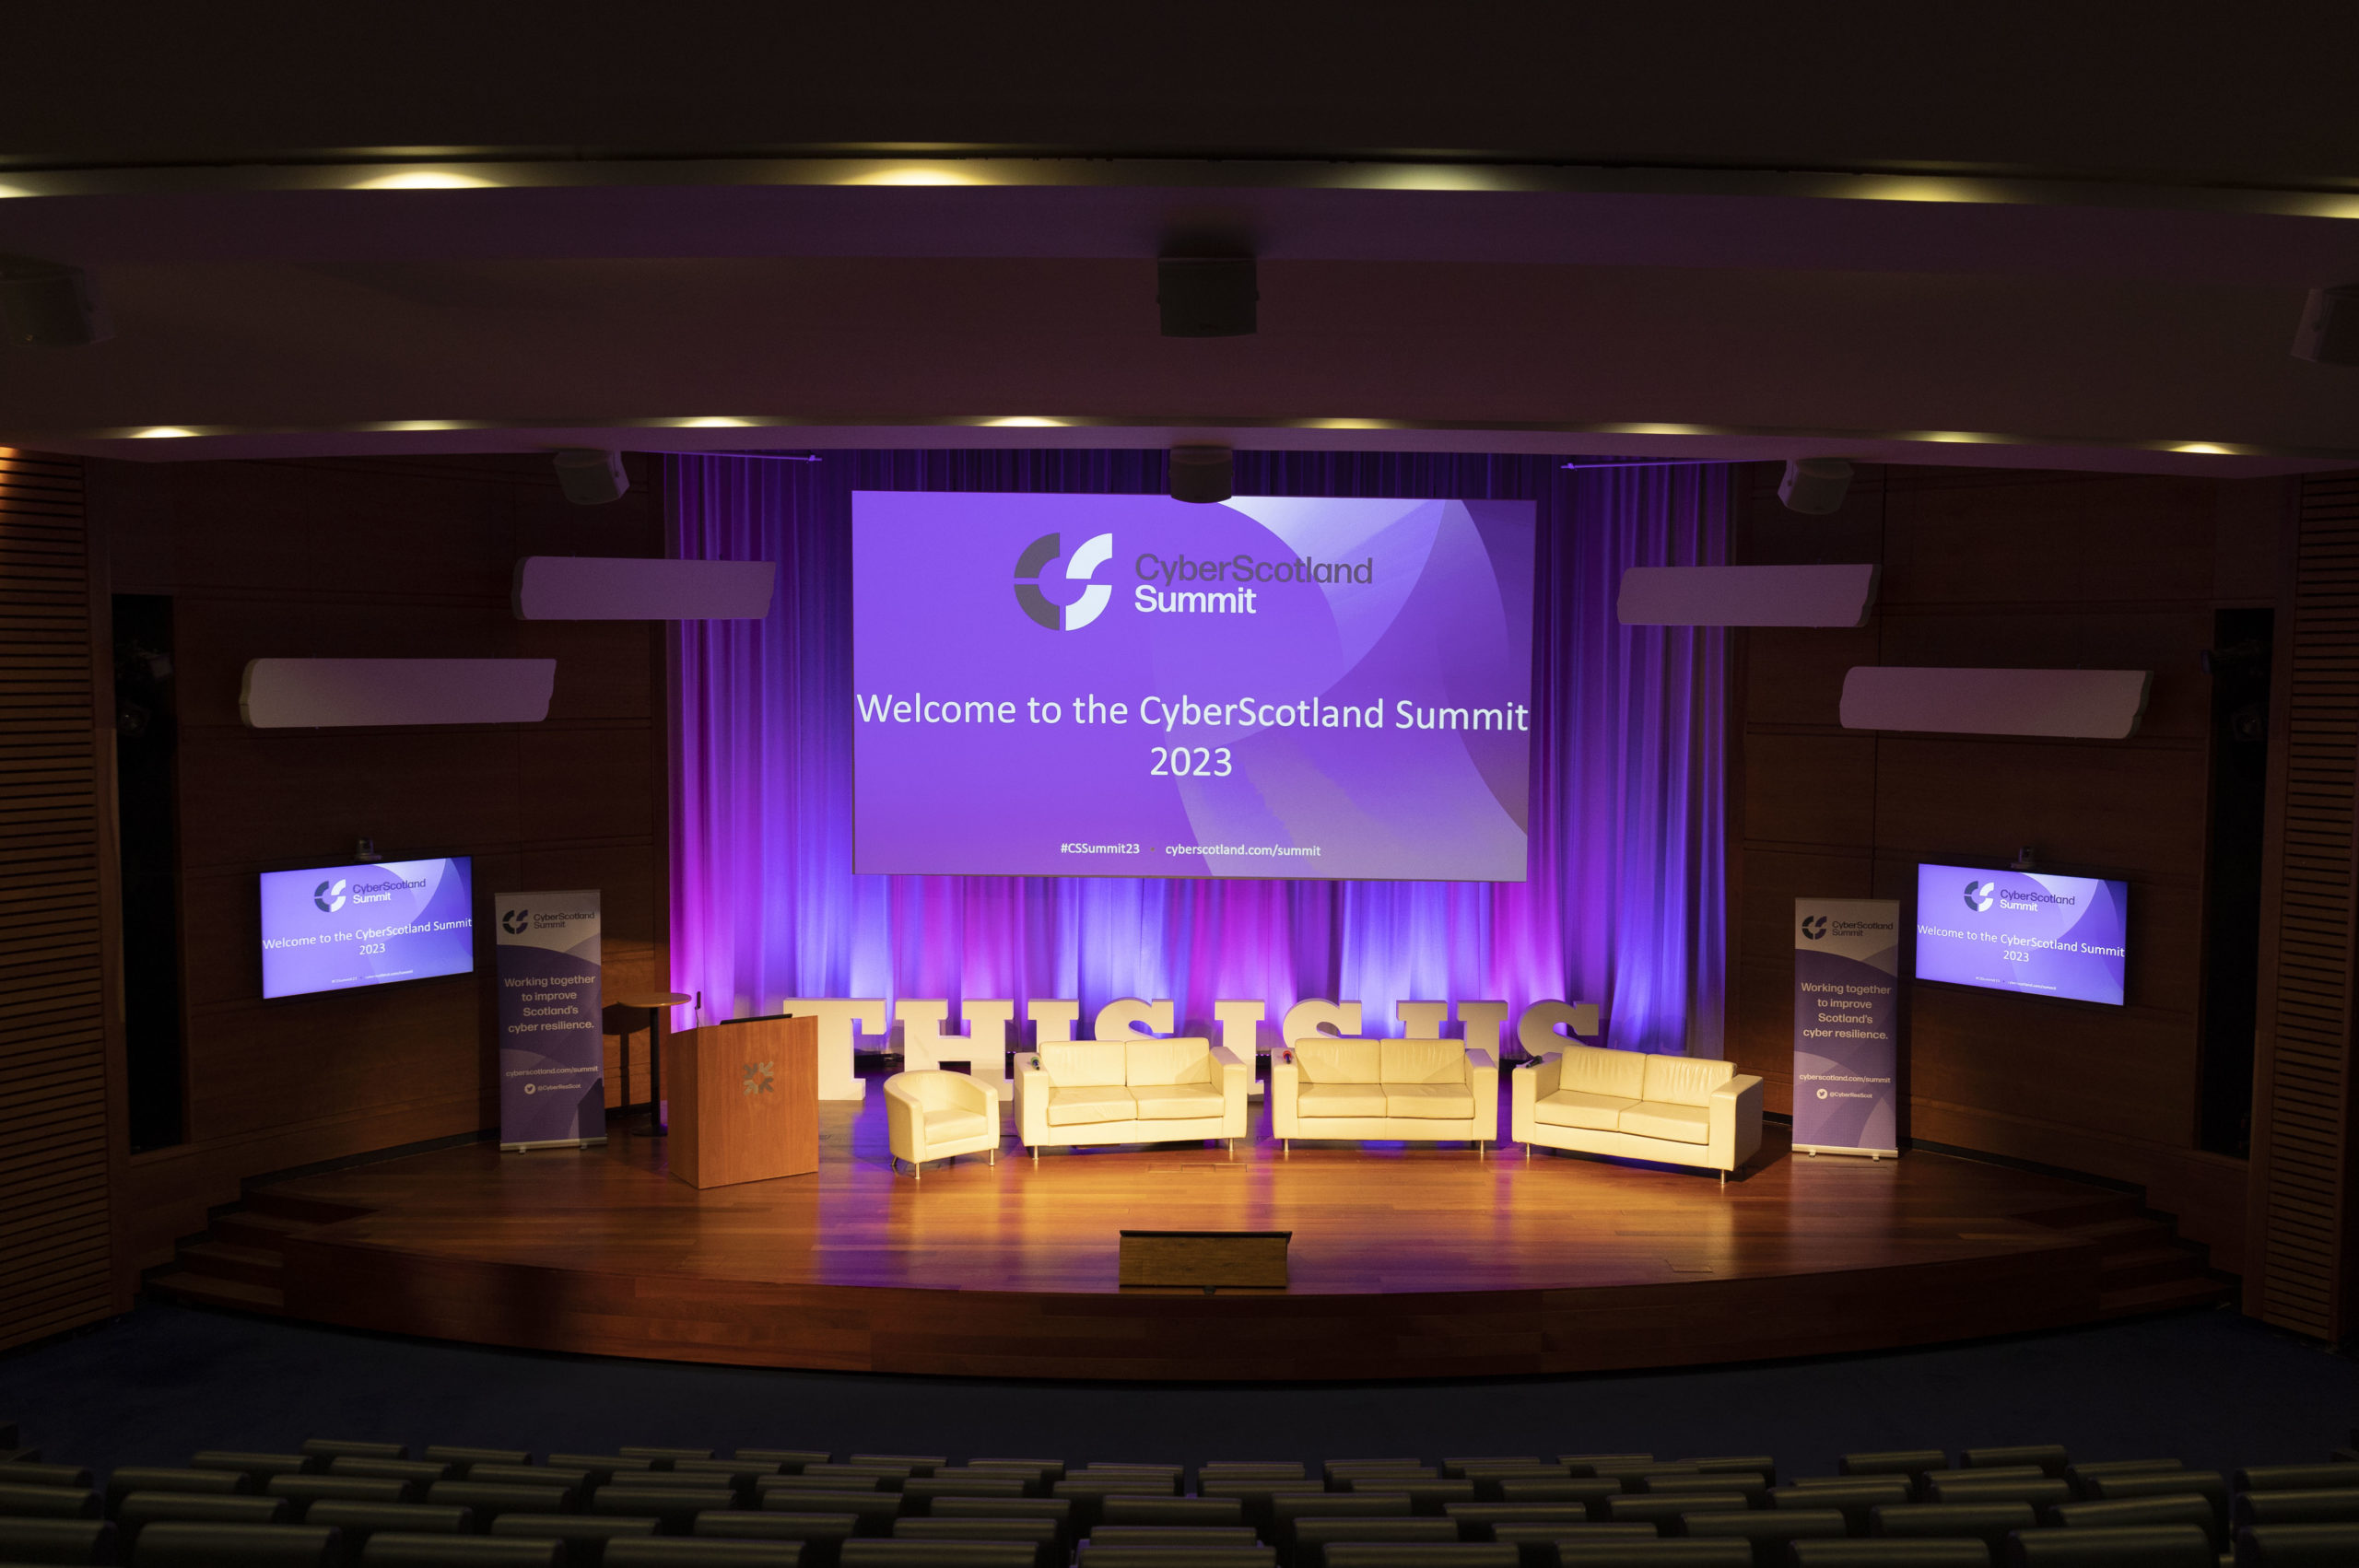 CyberScotland Summit 2023: experts gather to discuss the latest cyber security threats and trends